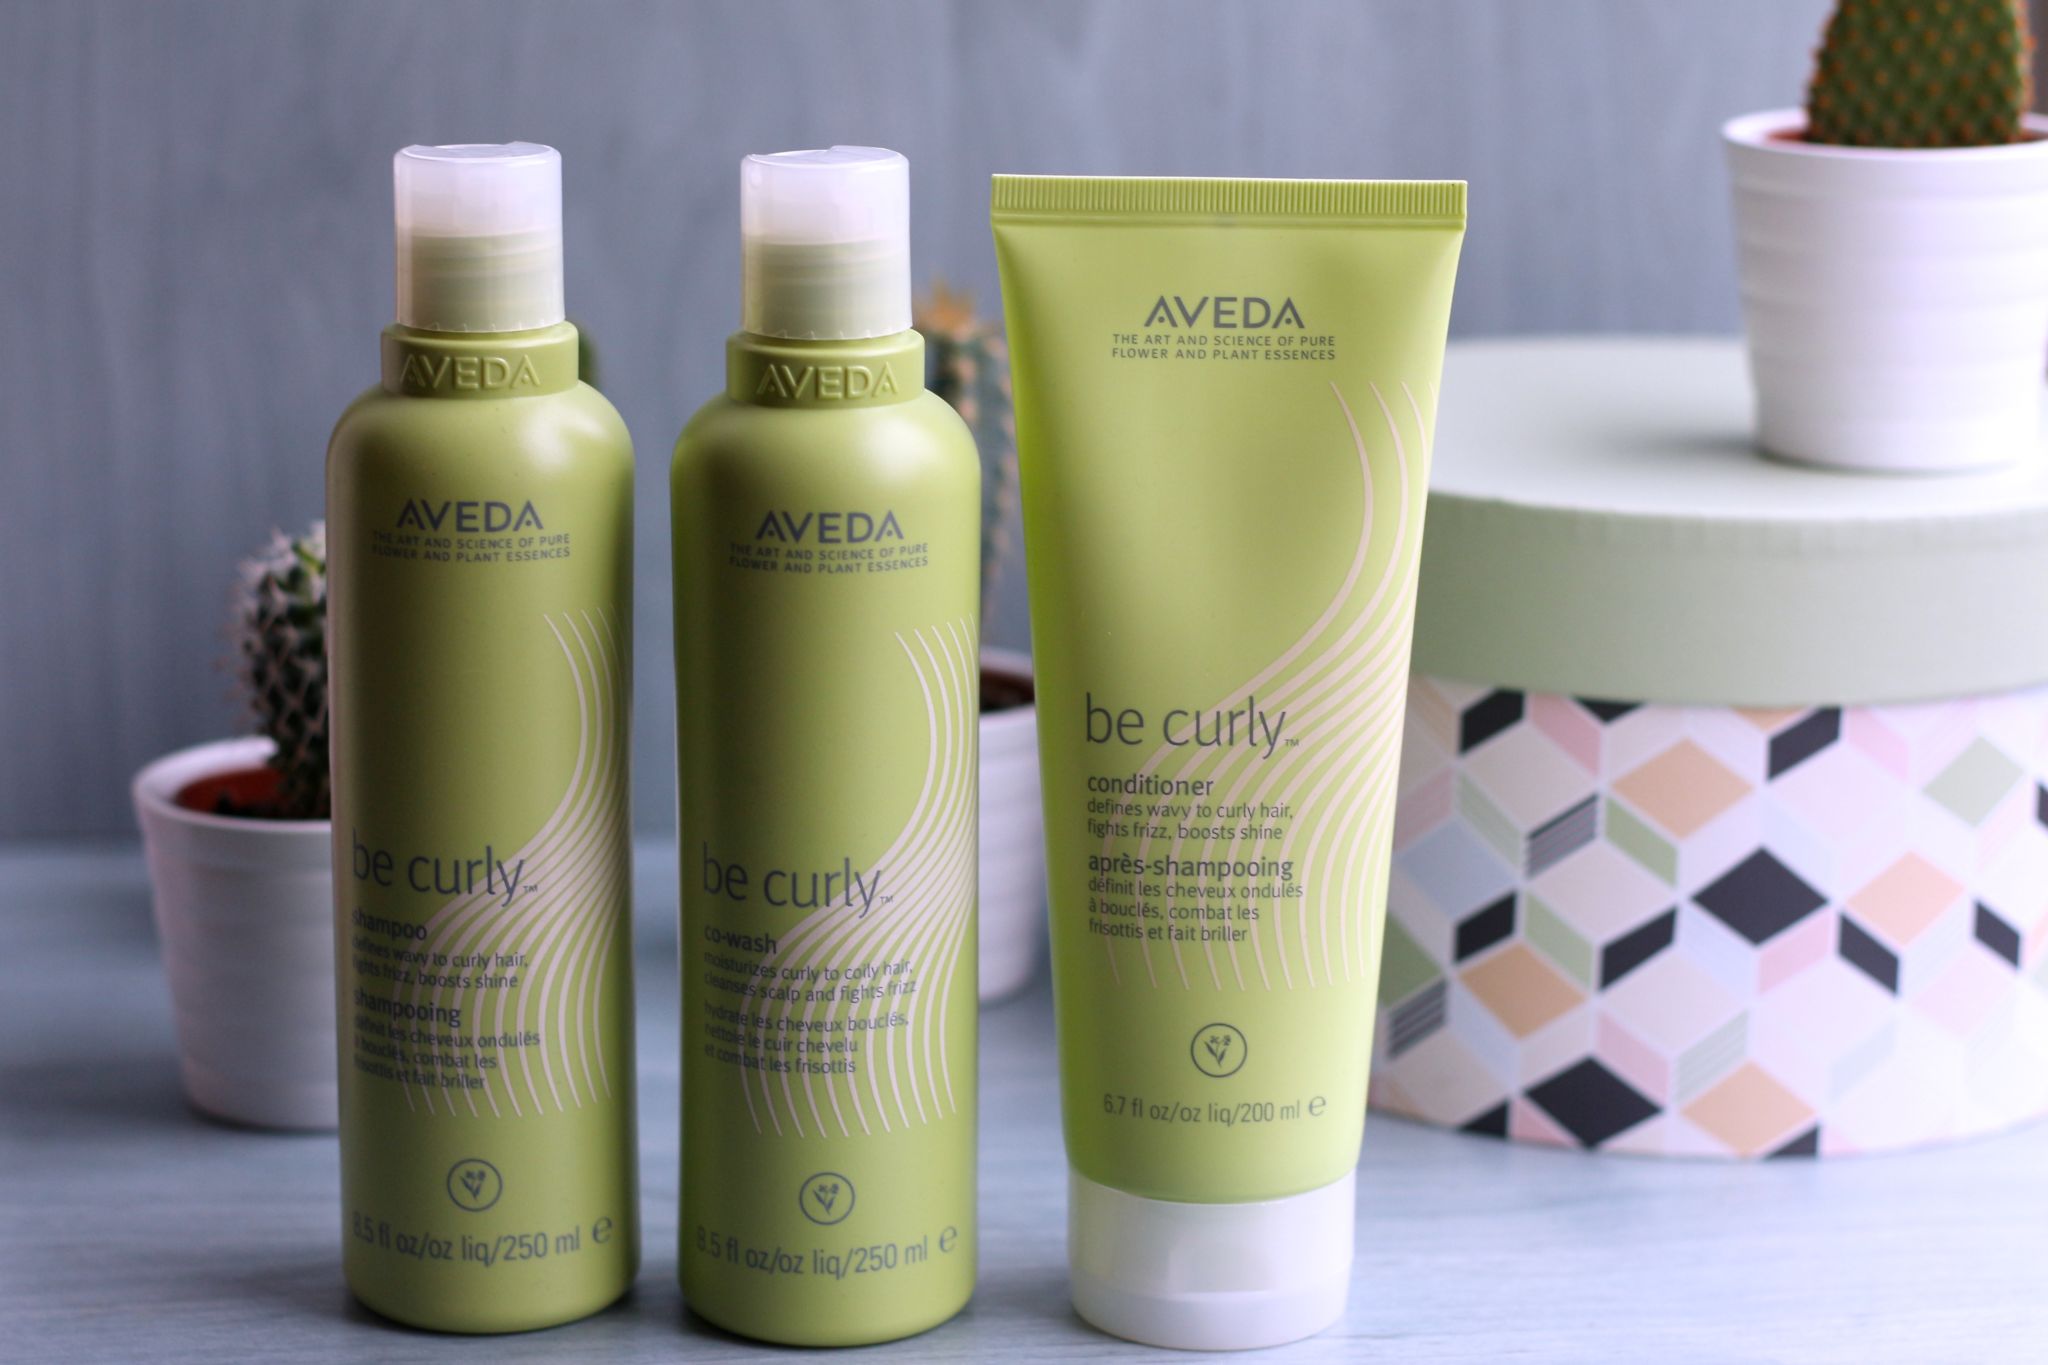 Aveda Be Curly Range for Curly Hair